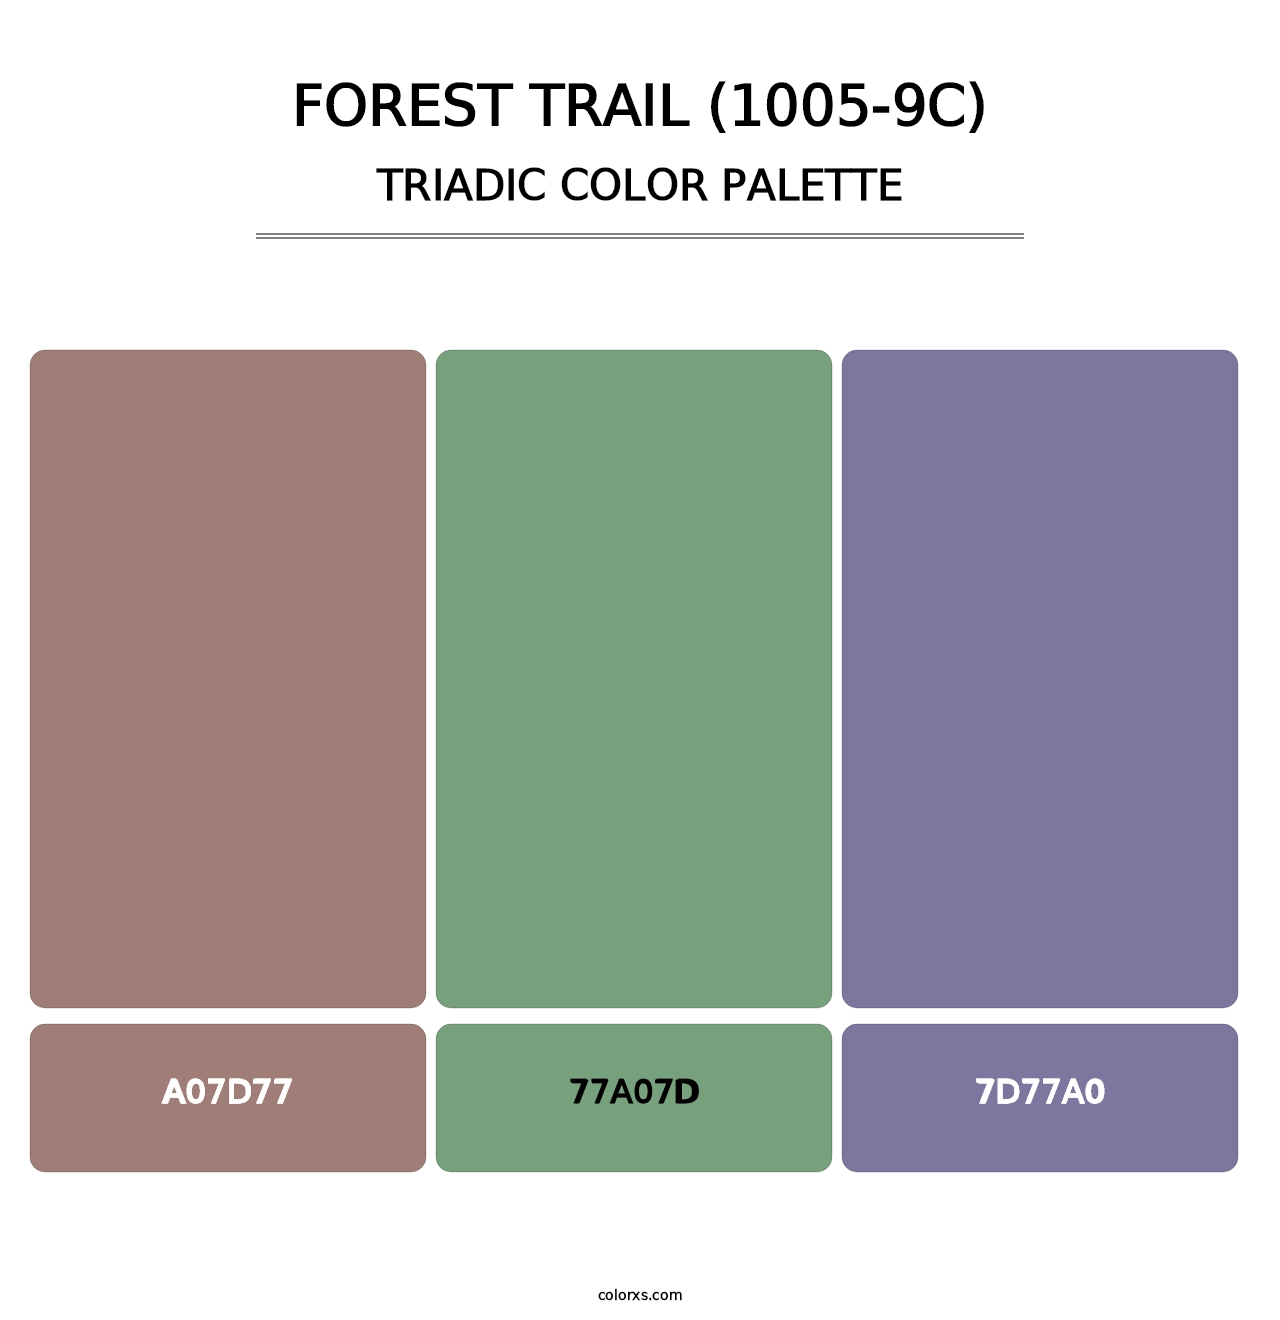 Forest Trail (1005-9C) - Triadic Color Palette